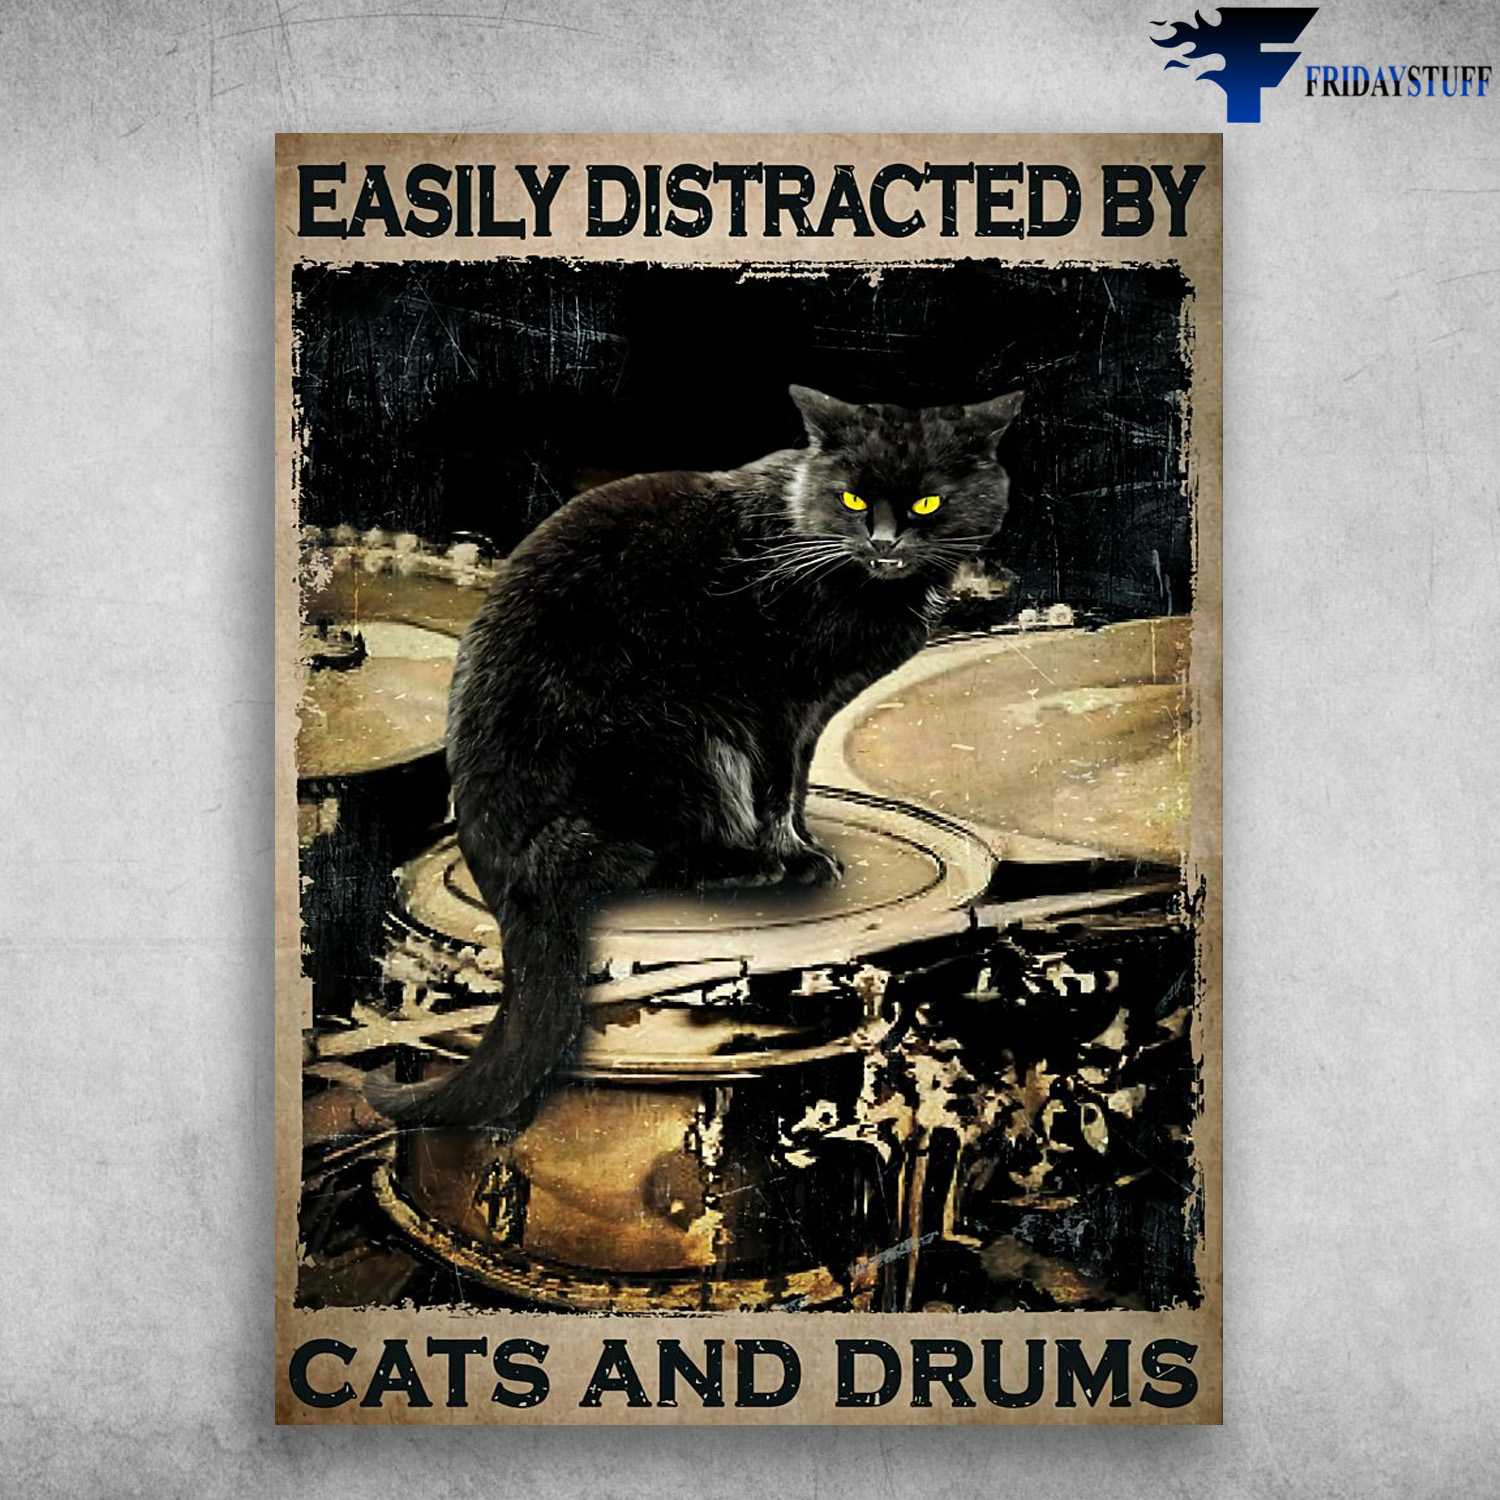 Black Cat Drumming, Drummer Poster, Easily Distracted By, Cats And Drums